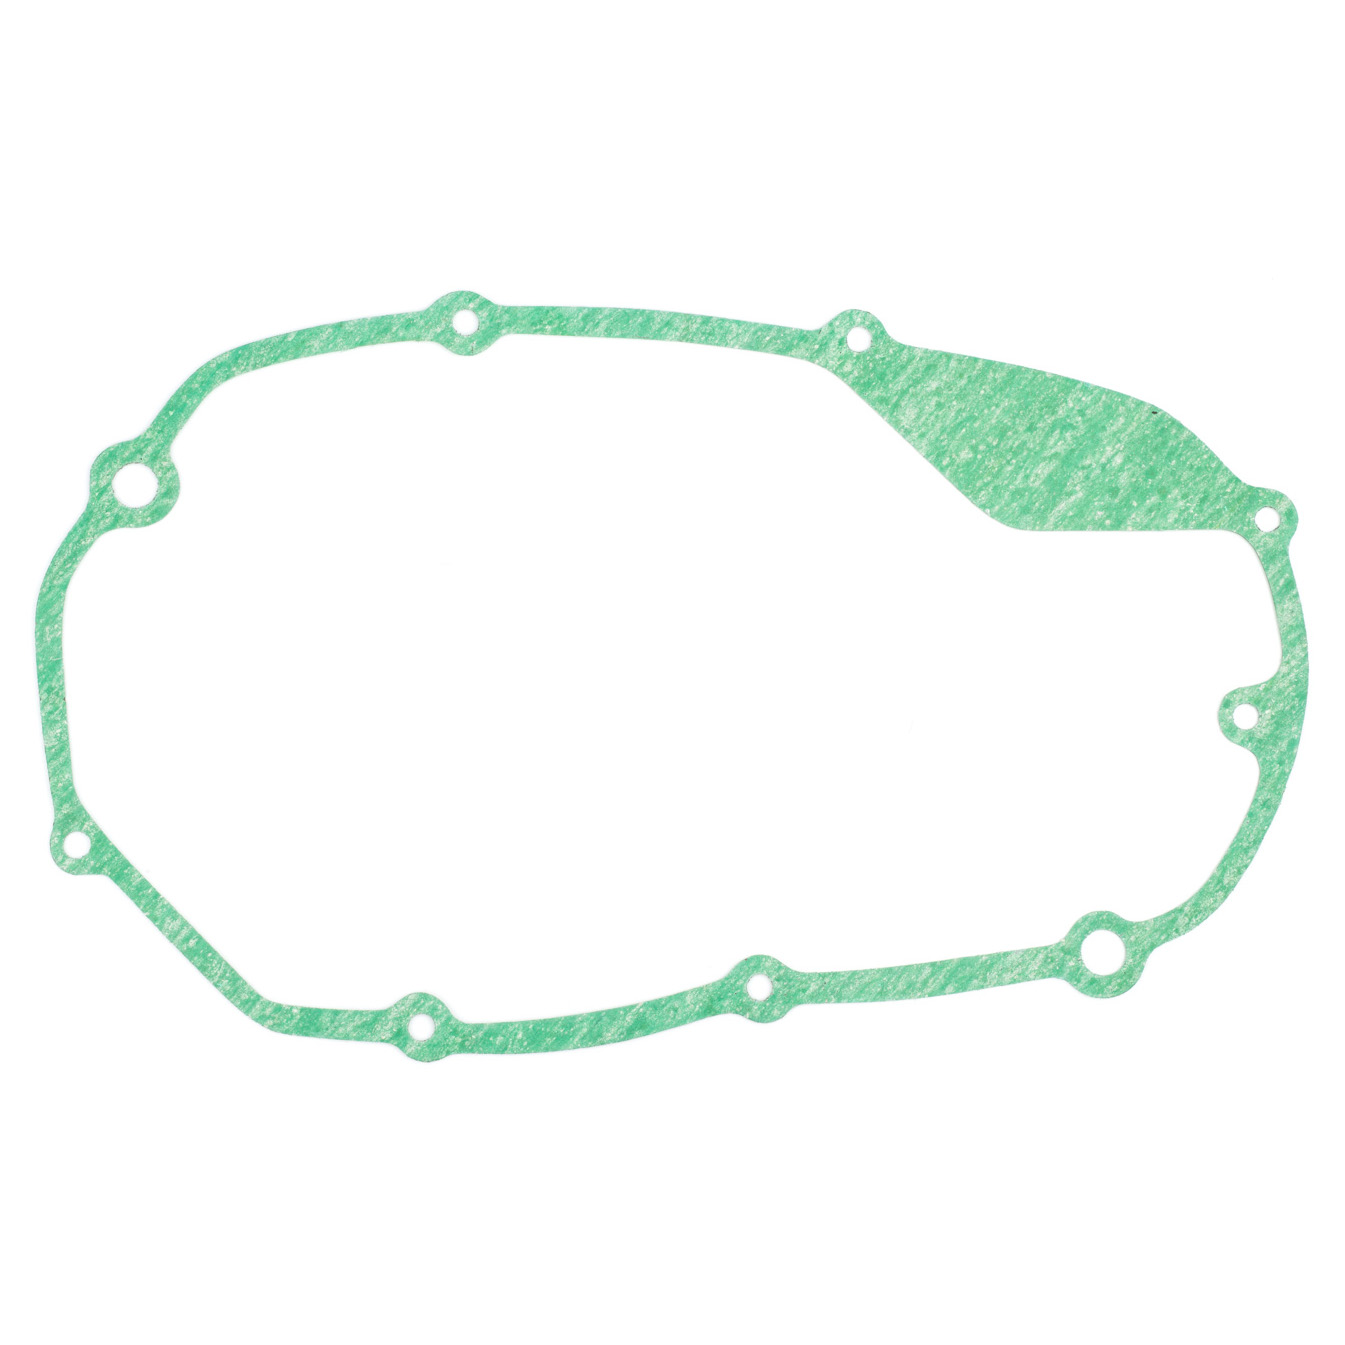 TZ350A Clutch Cover Gasket